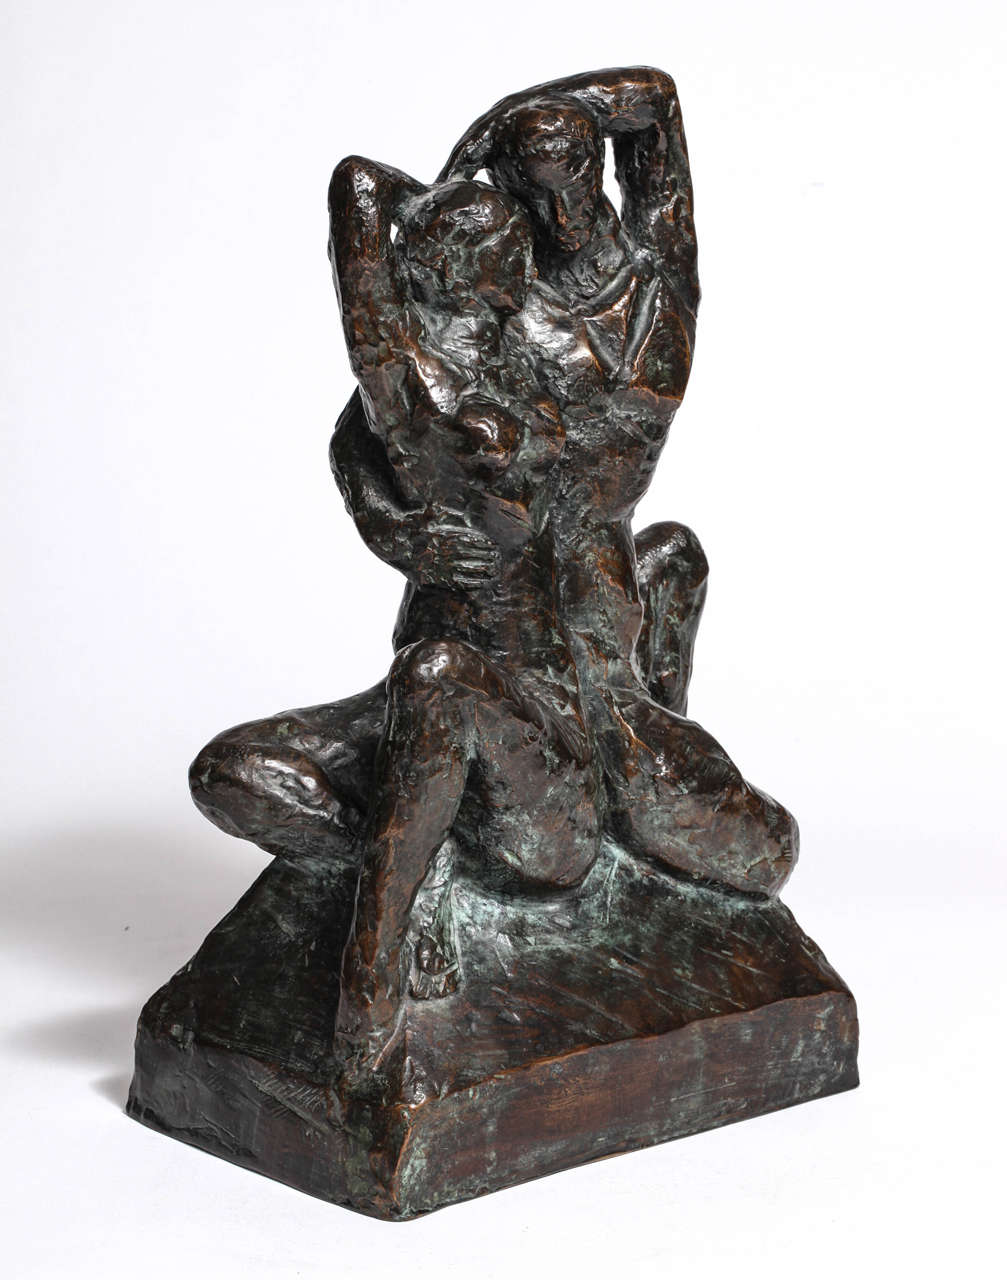 A William Zorach bronze sculpture of a nude man and woman, 